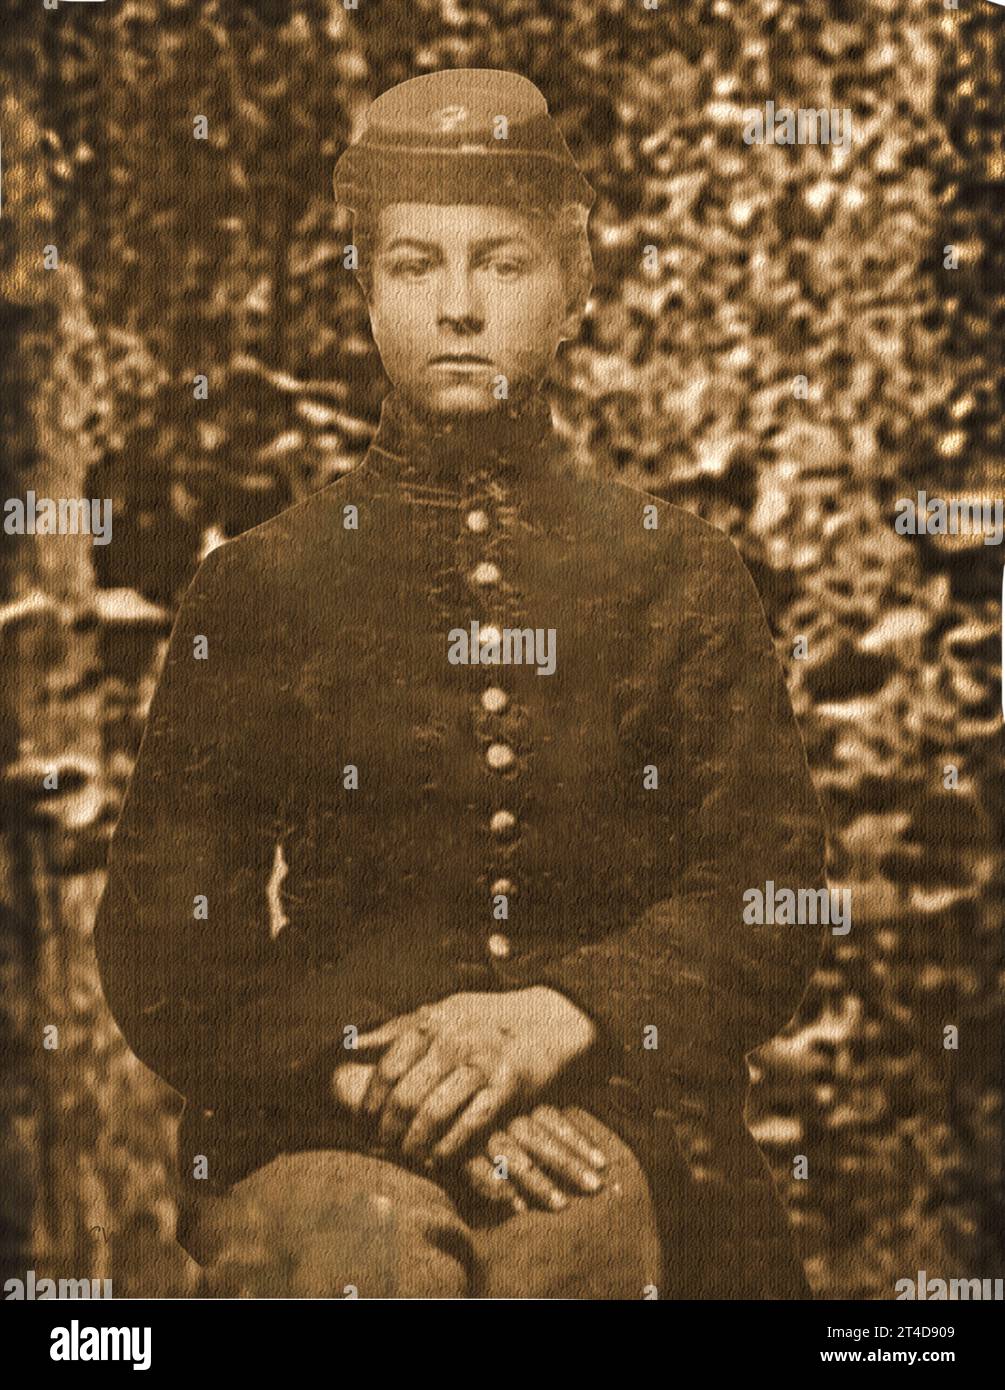 Portrait of a young American confederate soldier pictured during the American Civil War (1861–1865). The image appears to show Private Edwin Francis Jemison who was killed at the Battle of Malvern Hill on July 1, 1862 aged only 17. Stock Photo